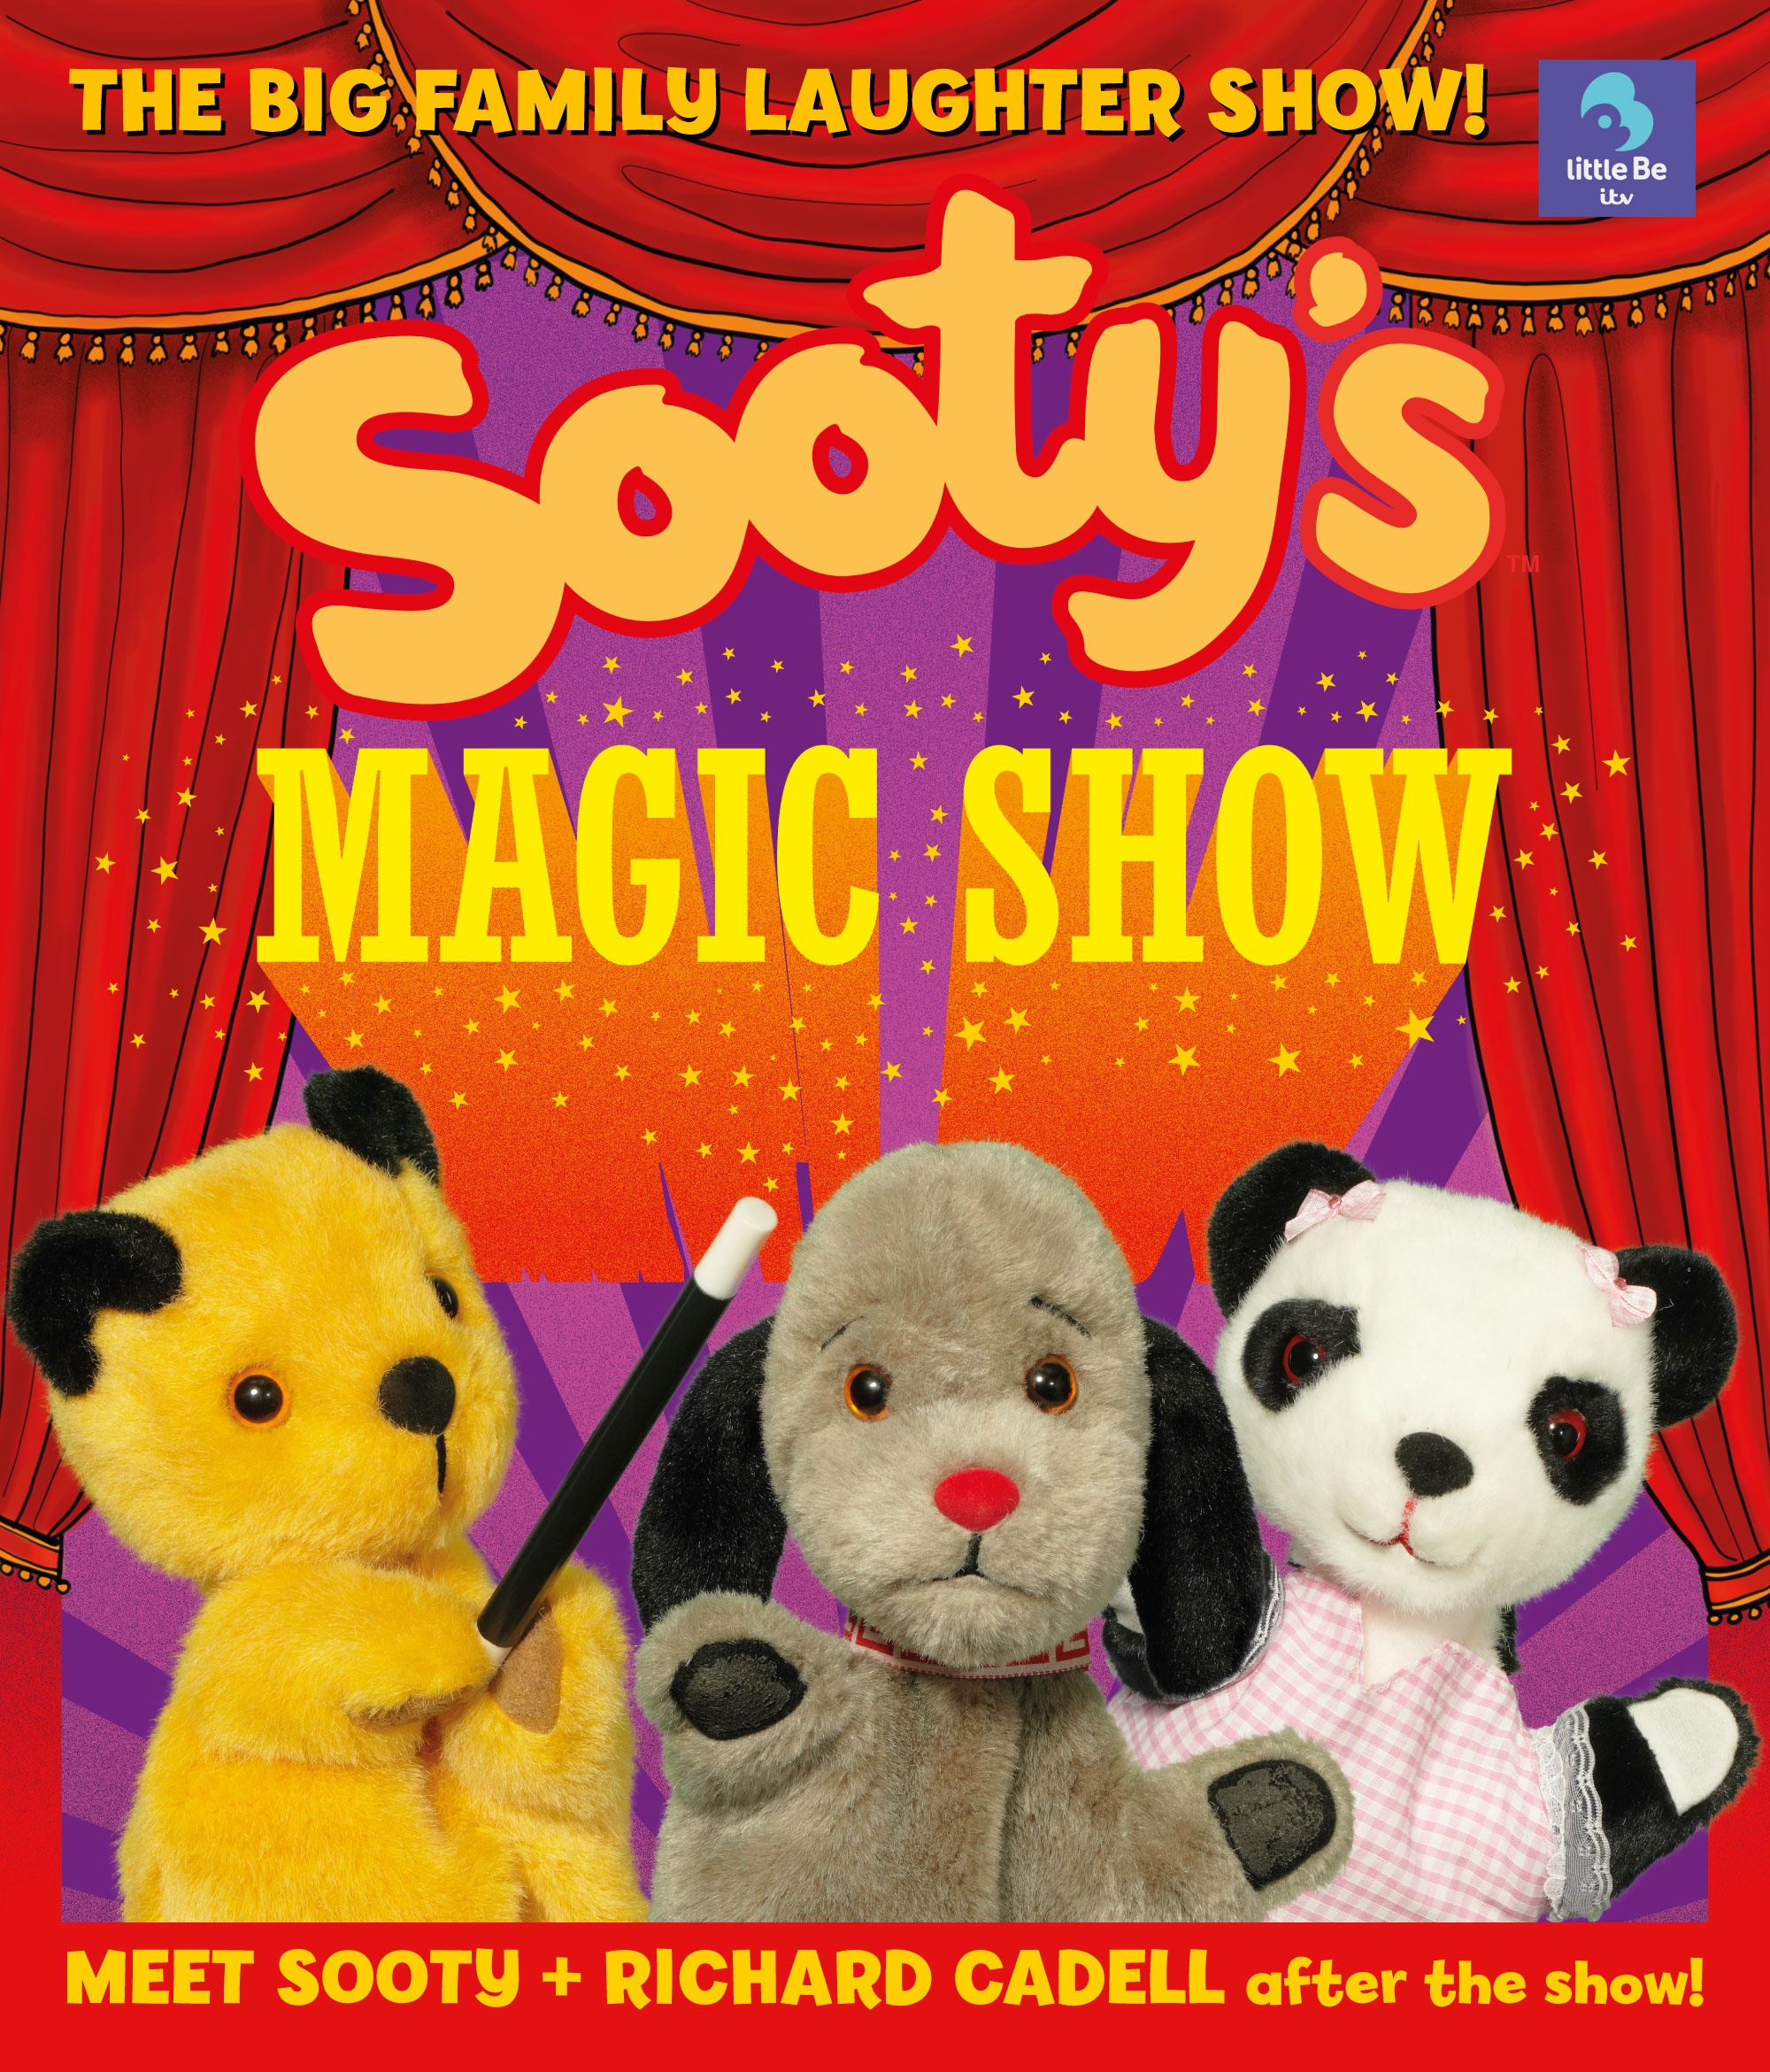 Izzy, wizzy…Let’s get busy, with Sooty and friends..